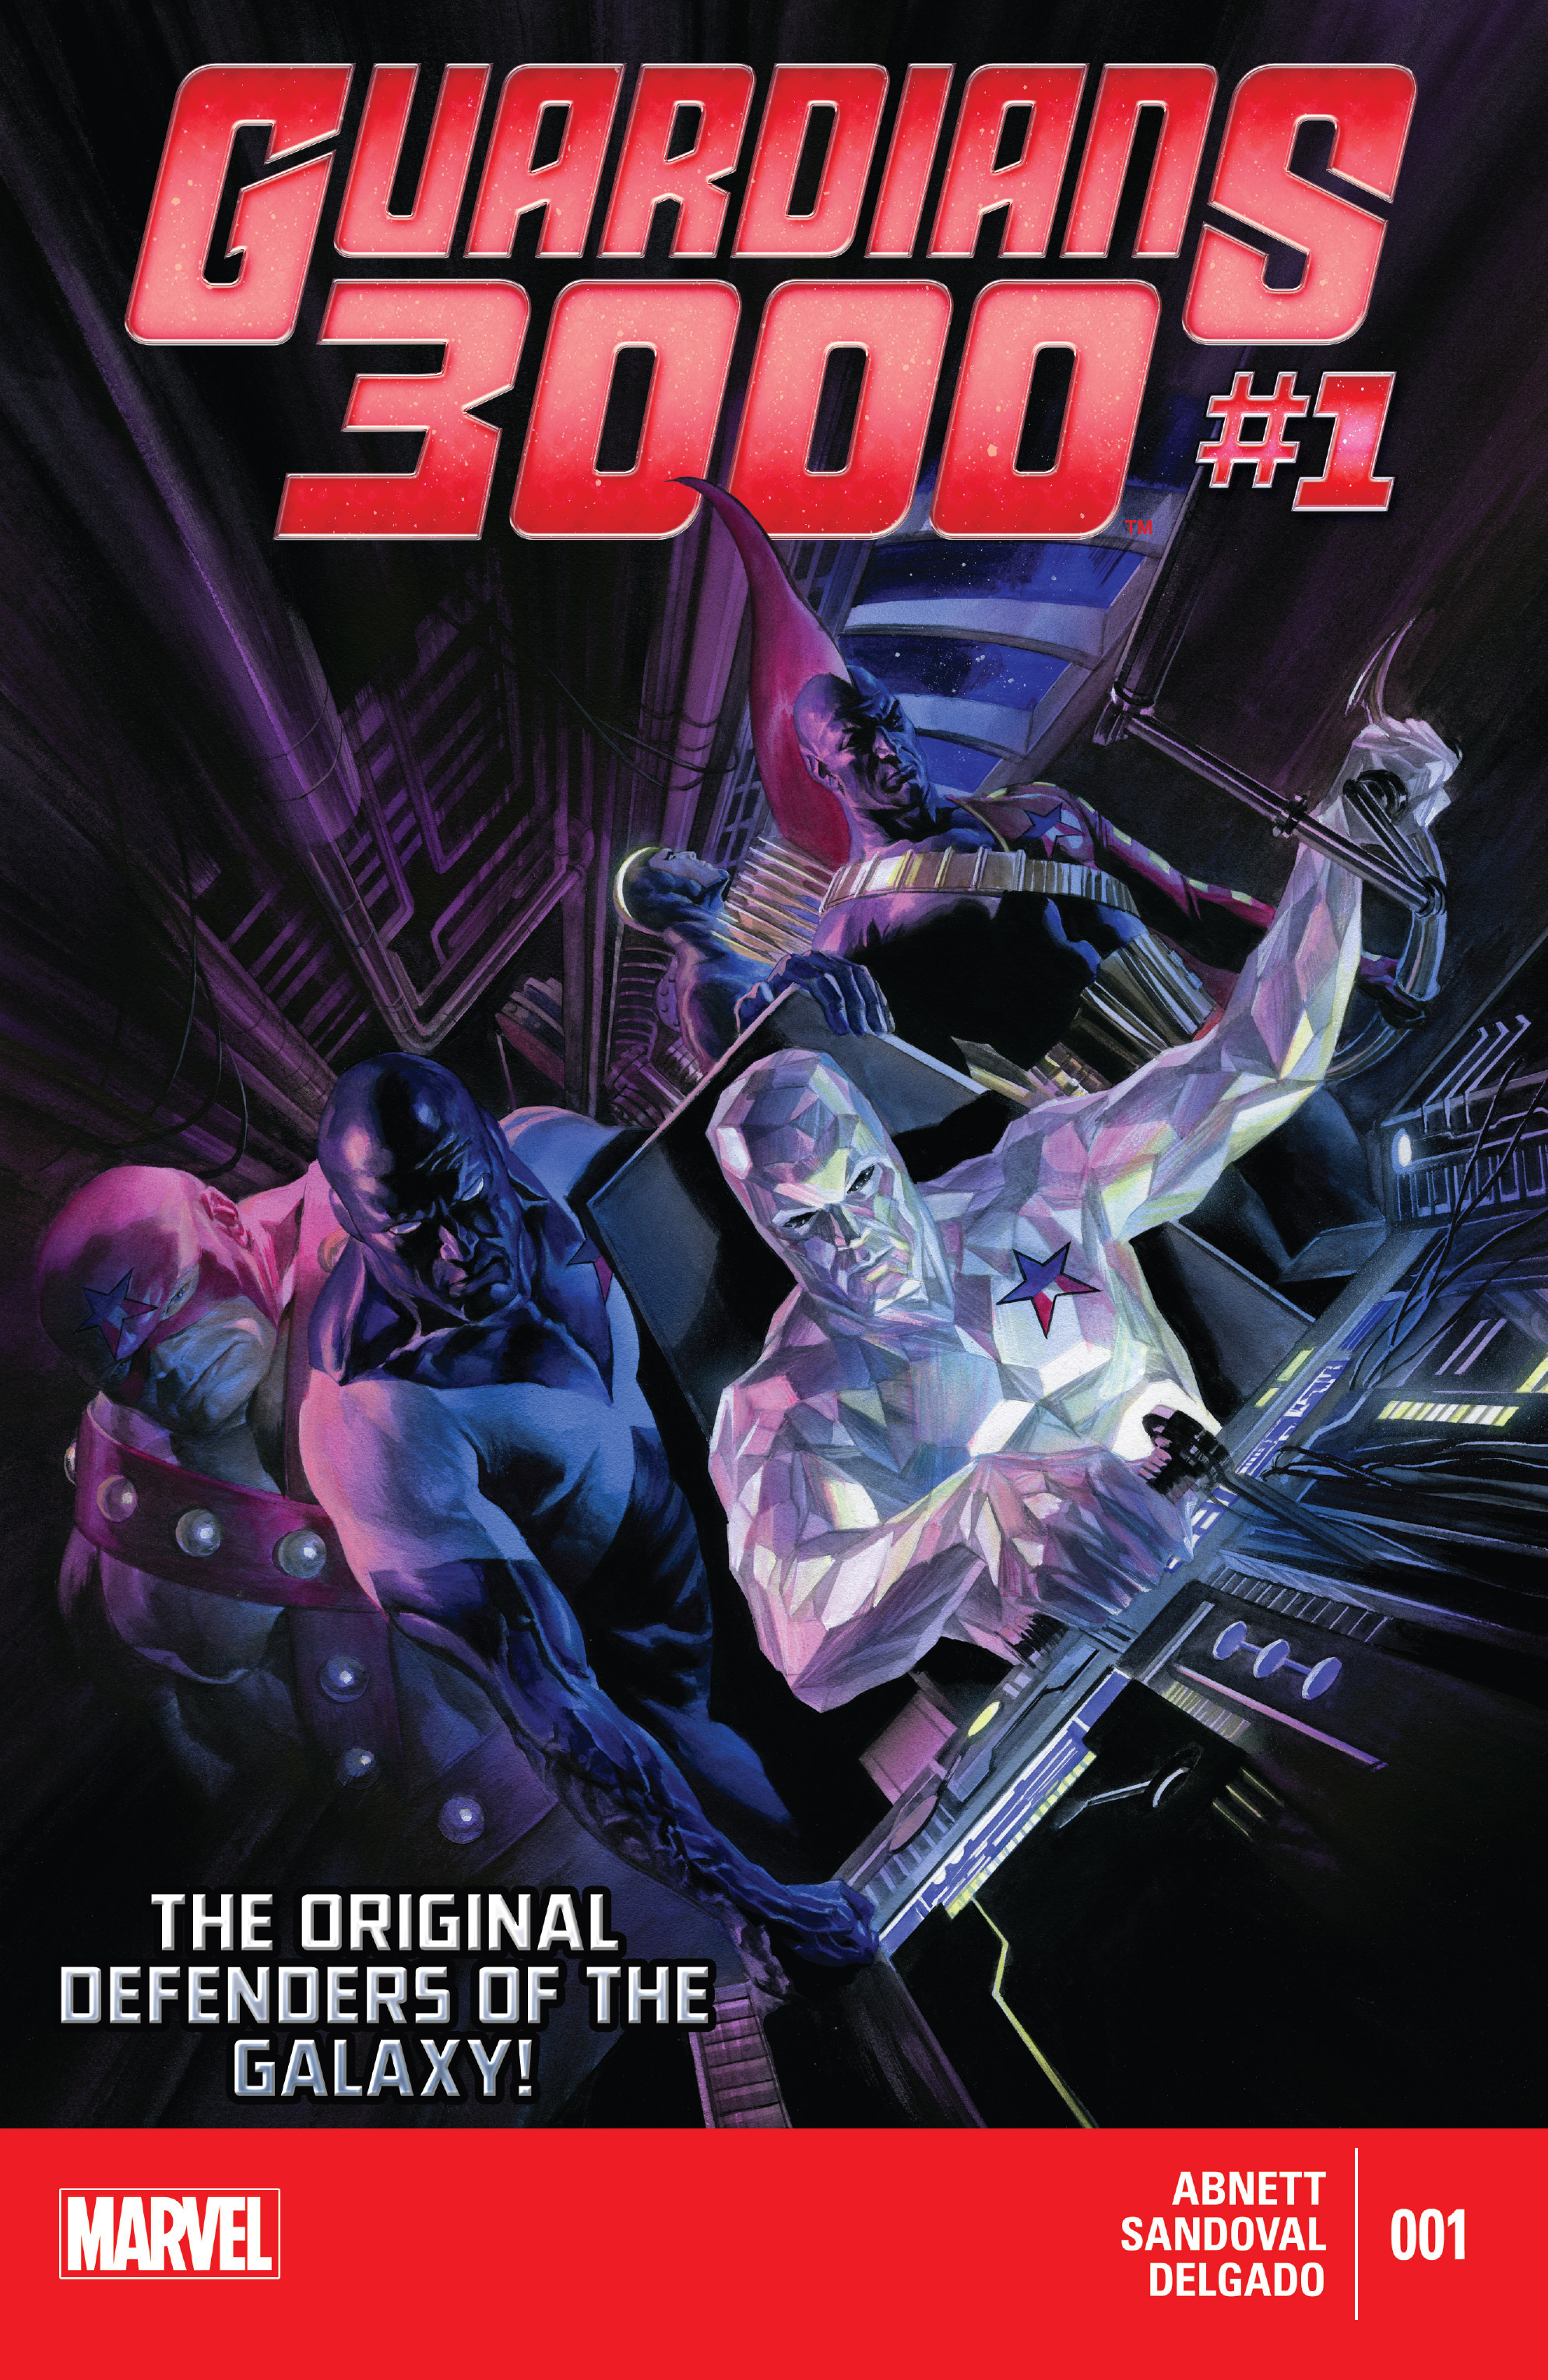 Read online Guardians 3000 comic -  Issue #1 - 1